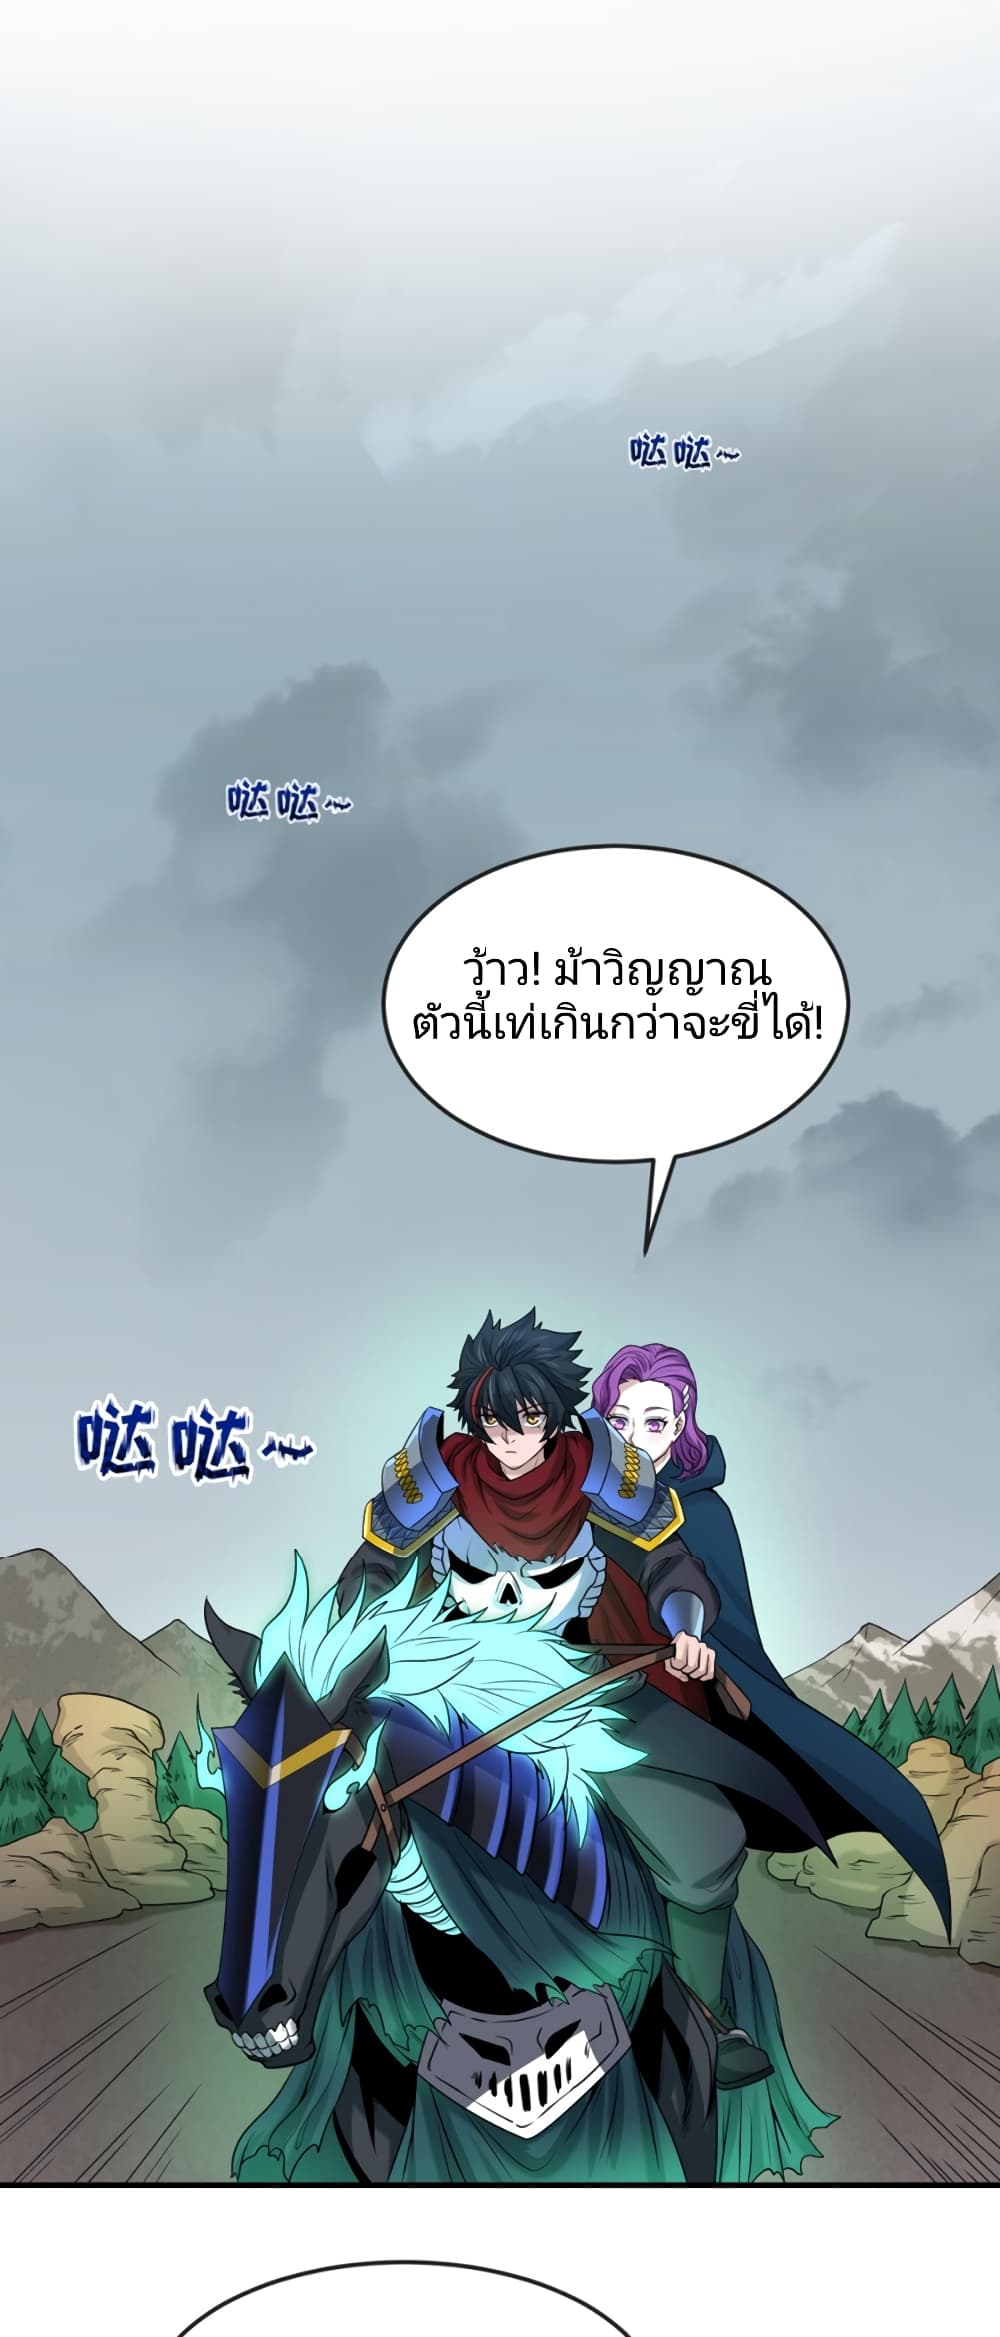 The Age of Ghost Spirits à¸à¸­à¸à¸à¸µà¹ 35 (20)